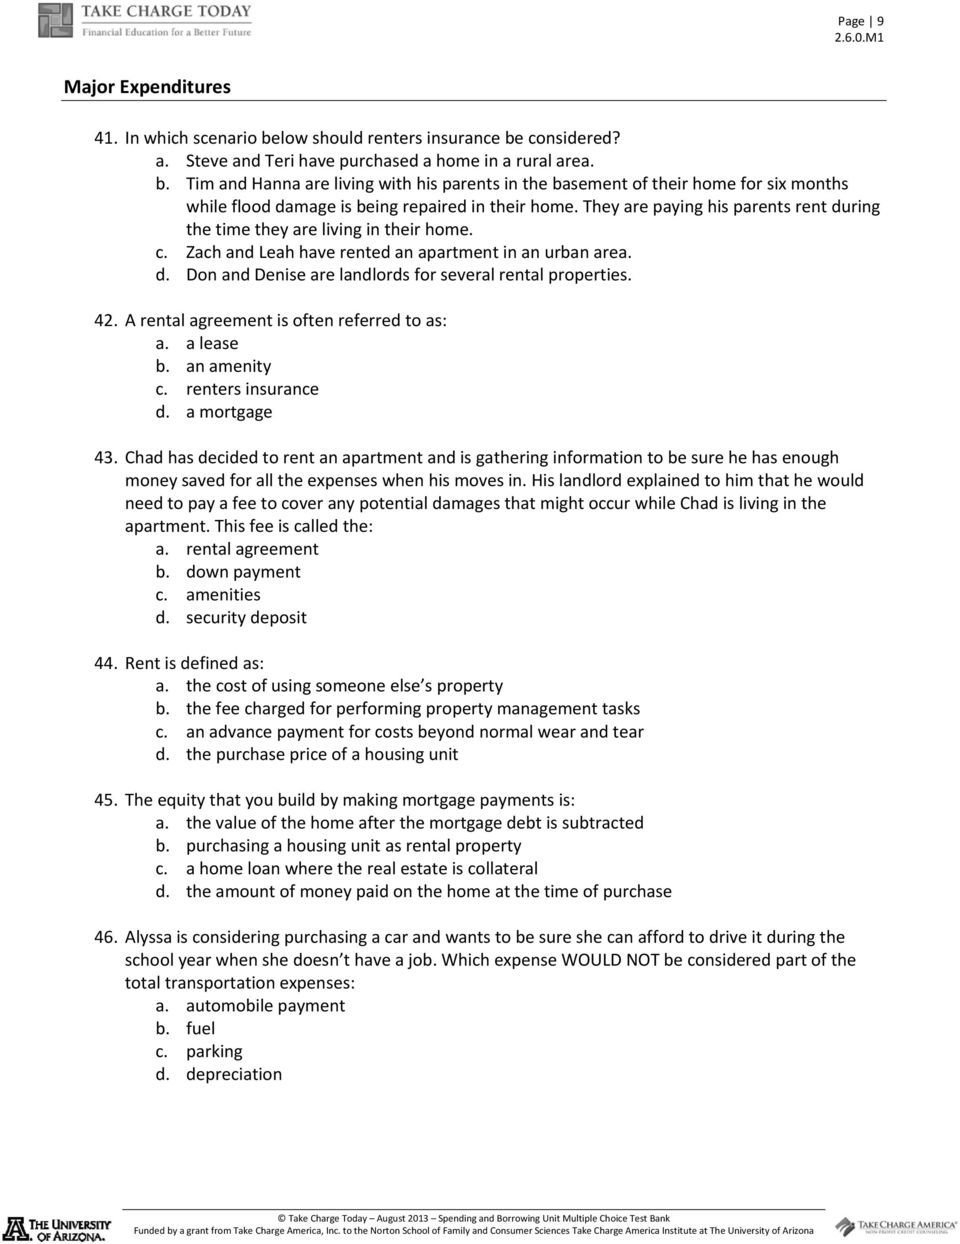 Take Charge Today Worksheet Answers  Briefencounters In Take Charge Today Worksheet Answers